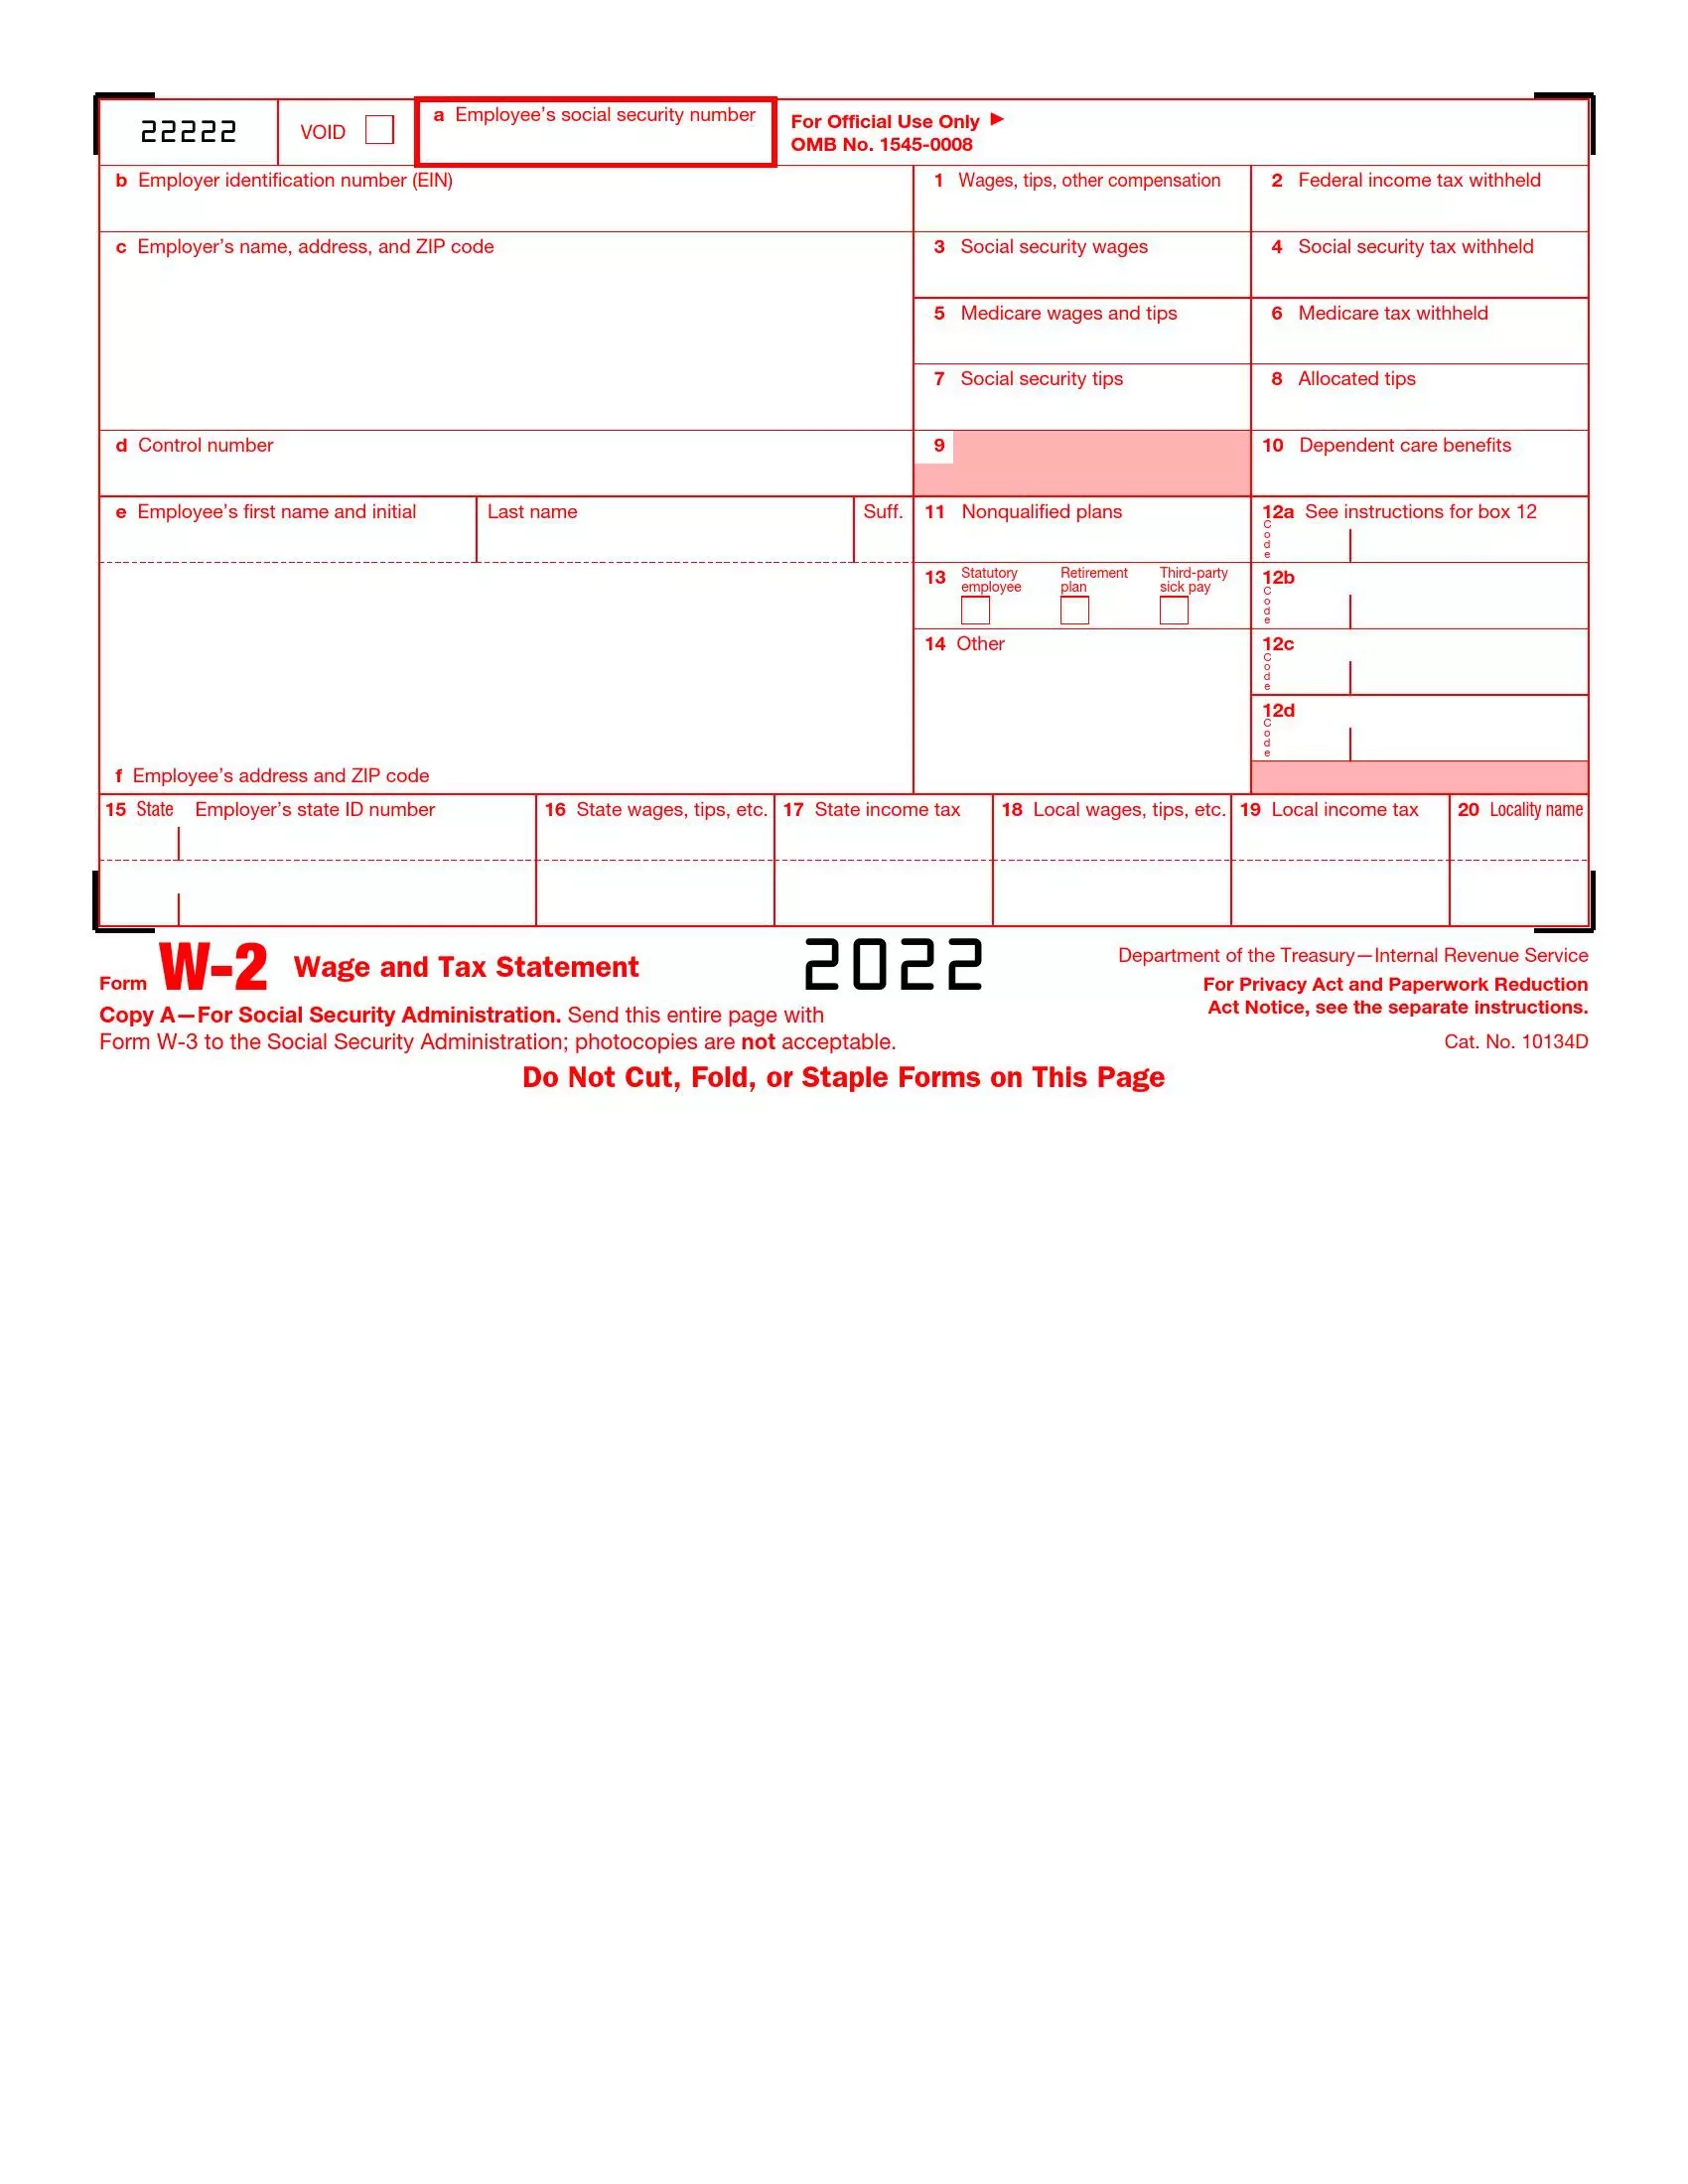 Irs Form W-2 ≡ Fill Out Printable Pdf Forms Online for W2 Download Form